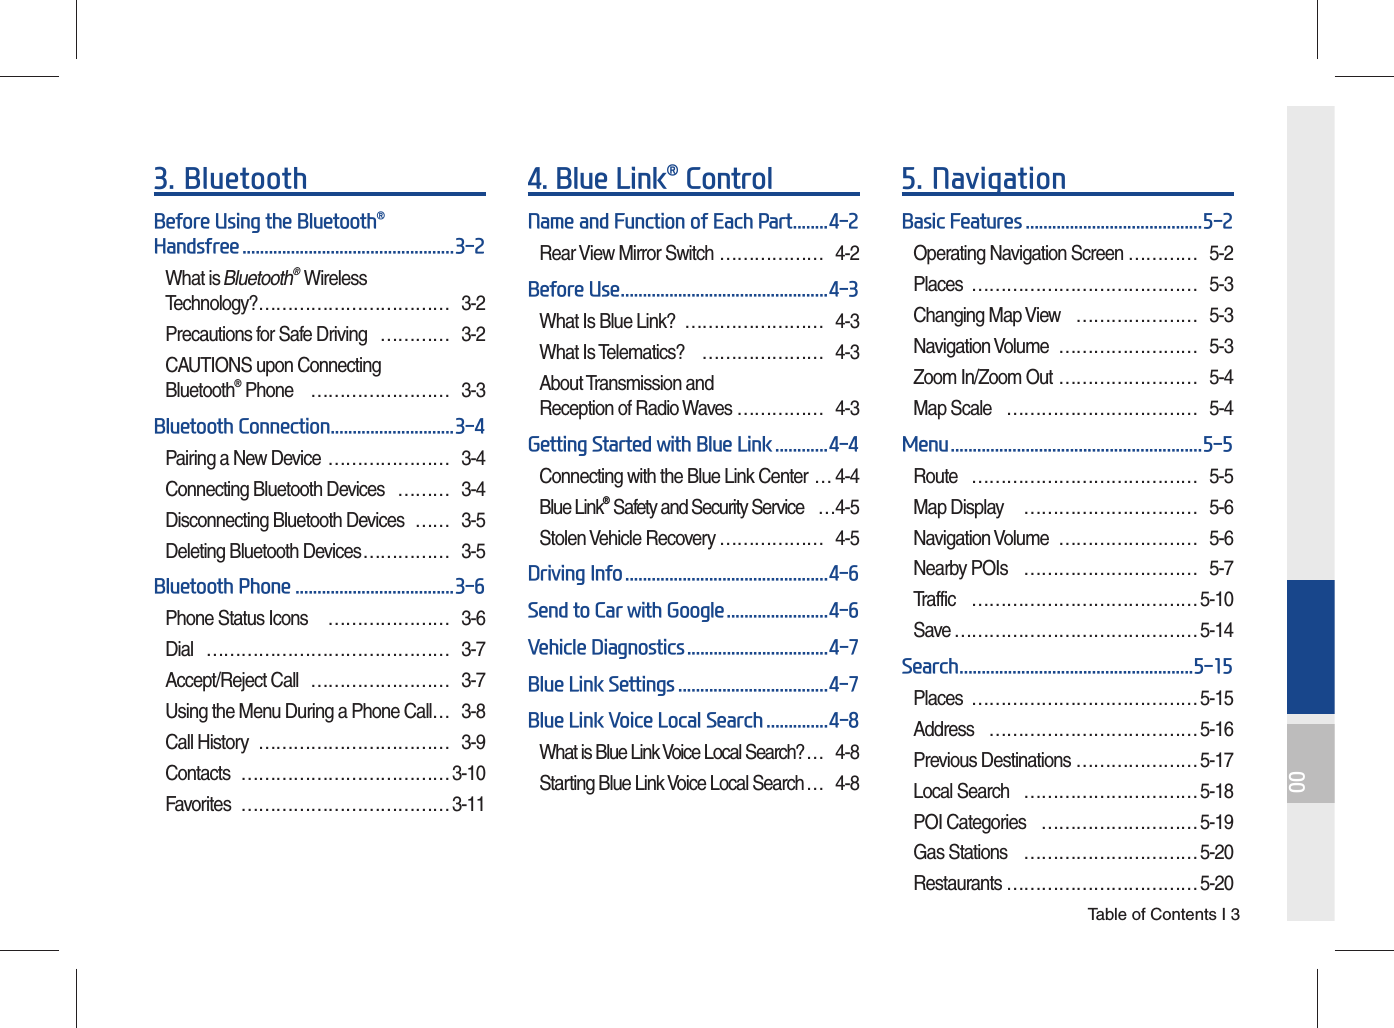  Table of Contents I 3003. BluetoothBefore Using the Bluetooth® Handsfree ................................................3-2What is Bluetooth® Wireless Technology? …………………………… 3-2Precautions for Safe Driving  ………… 3-2CAUTIONS upon Connecting Bluetooth® Phone  …………………… 3-3Bluetooth Connection ............................3-4Pairing a New Device  ………………… 3-4Connecting Bluetooth Devices  ……… 3-4Disconnecting Bluetooth Devices  …… 3-5Deleting Bluetooth Devices …………… 3-5Bluetooth Phone ....................................3-6Phone Status Icons   ………………… 3-6Dial …………………………………… 3-7Accept/Reject Call  …………………… 3-7Using the Menu During a Phone Call … 3-8Call History  …………………………… 3-9Contacts ………………………………3-10Favorites ………………………………3-114.  Blue Link® ControlName and Function of Each Part ........4-2Rear View Mirror Switch ……………… 4-2Before Use ...............................................4-3What Is Blue Link?  …………………… 4-3What Is Telematics?  ………………… 4-3About Transmission and Reception of Radio Waves …………… 4-3Getting Started with Blue Link ............4-4Connecting with the Blue Link Center … 4-4Blue Link® Safety and Security Service  …4-5Stolen Vehicle Recovery ……………… 4-5Driving Info ..............................................4-6Send to Car with Google .......................4-6Vehicle Diagnostics ................................4-7Blue Link Settings ..................................4-7Blue Link Voice Local Search ..............4-8What is Blue Link Voice Local Search? … 4-8Starting Blue Link Voice Local Search … 4-85. NavigationBasic Features ........................................5-2Operating Navigation Screen ………… 5-2Places ………………………………… 5-3Changing Map View  ………………… 5-3Navigation Volume  …………………… 5-3Zoom In/Zoom Out …………………… 5-4Map Scale  …………………………… 5-4Menu .........................................................5-5Route ………………………………… 5-5Map Display   ………………………… 5-6Navigation Volume  …………………… 5-6Nearby POIs  ………………………… 5-7Traffic ………………………………… 5-10Save ……………………………………5-14Search .....................................................5-15Places …………………………………5-15Address ………………………………5-16Previous Destinations ………………… 5-17Local Search  …………………………5-18POI Categories  ………………………5-19Gas Stations  ………………………… 5-20Restaurants ……………………………5-20